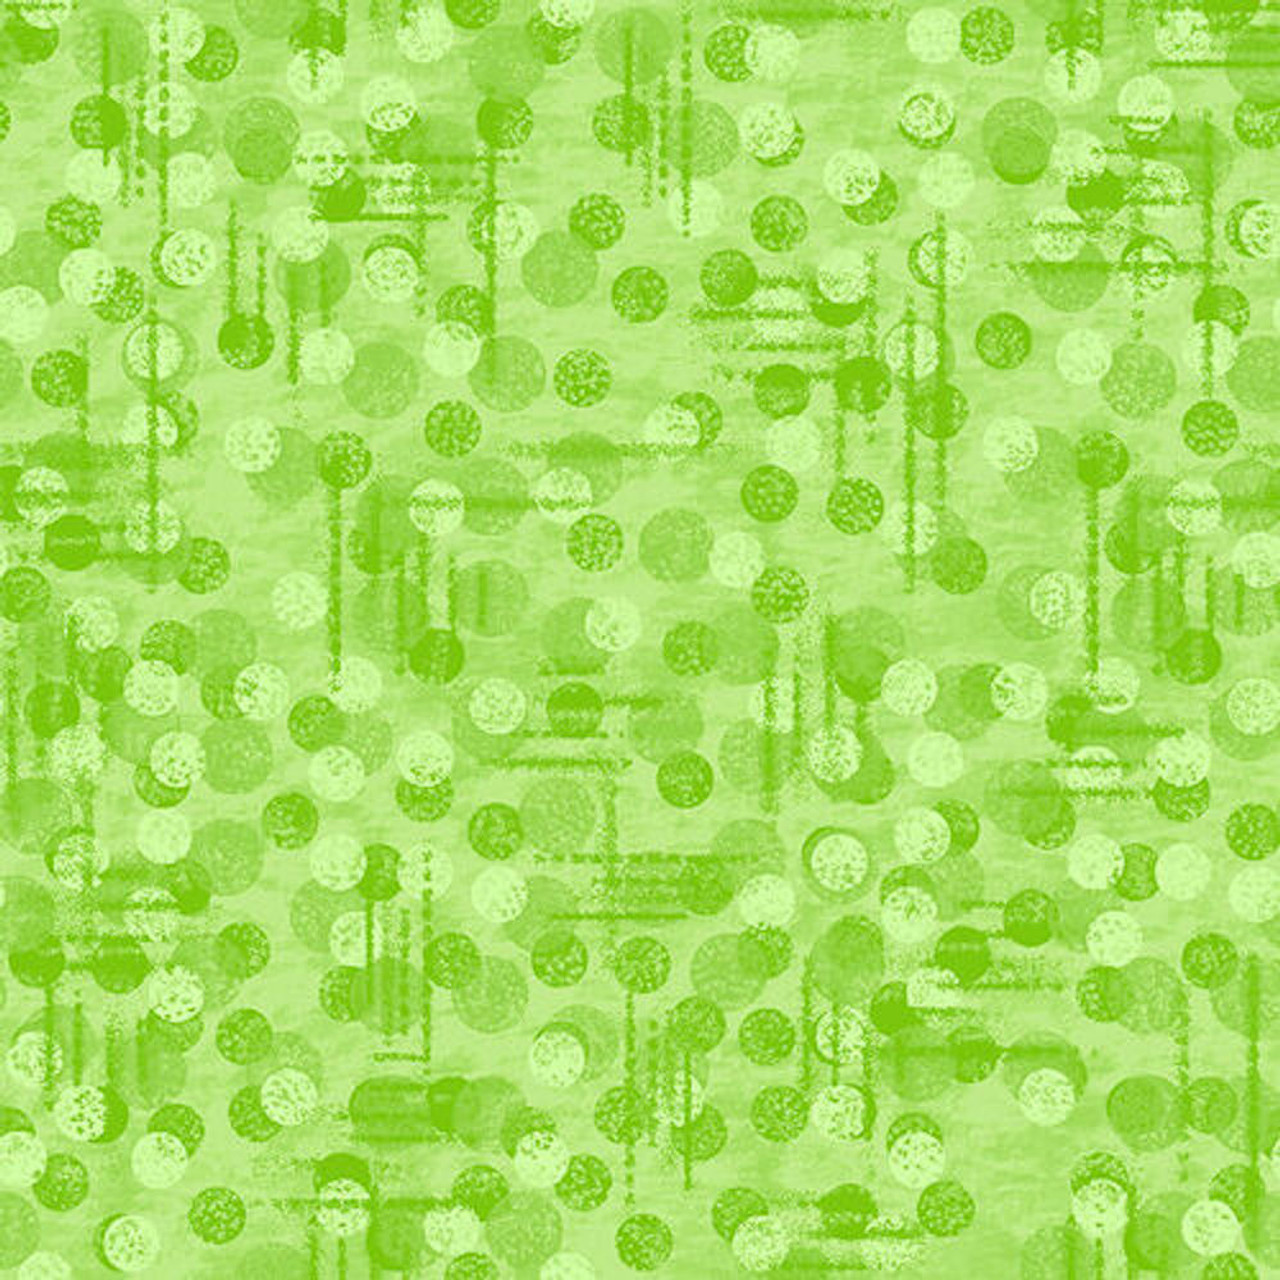 Blank Quilting Jot Dot Tonal Texture Chartreuse Cotton Fabric By The Yard